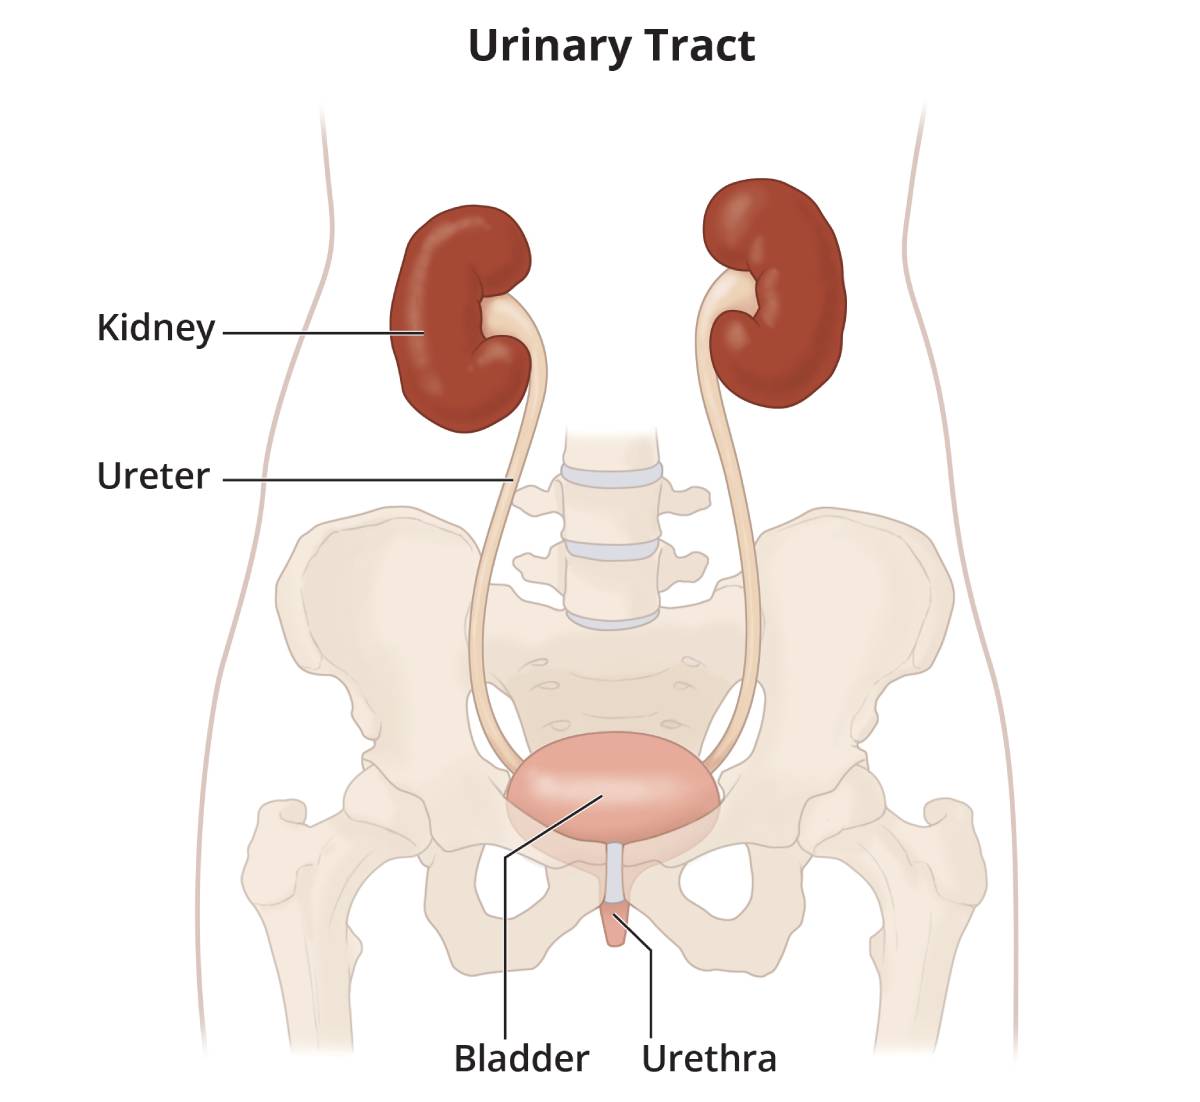 Urinary tract which includes the kidneys, ureters, bladder, and urethra.